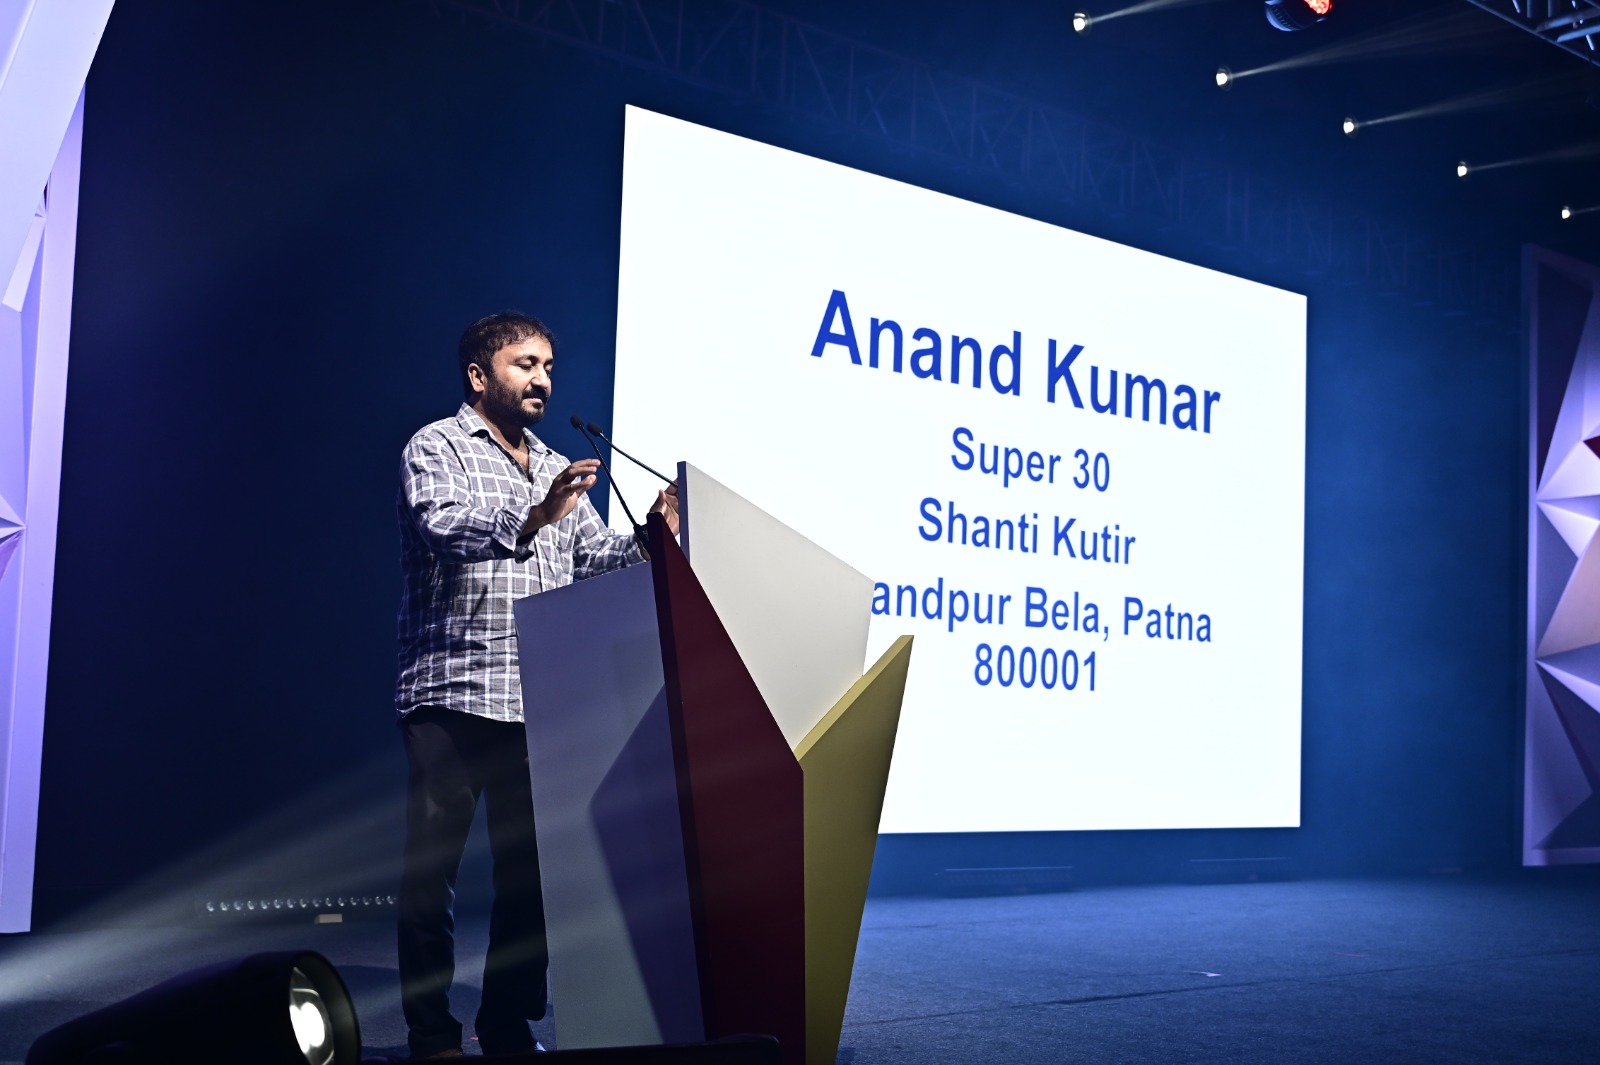 Anand Kumar as a guest speaker at a corporate event in Goa